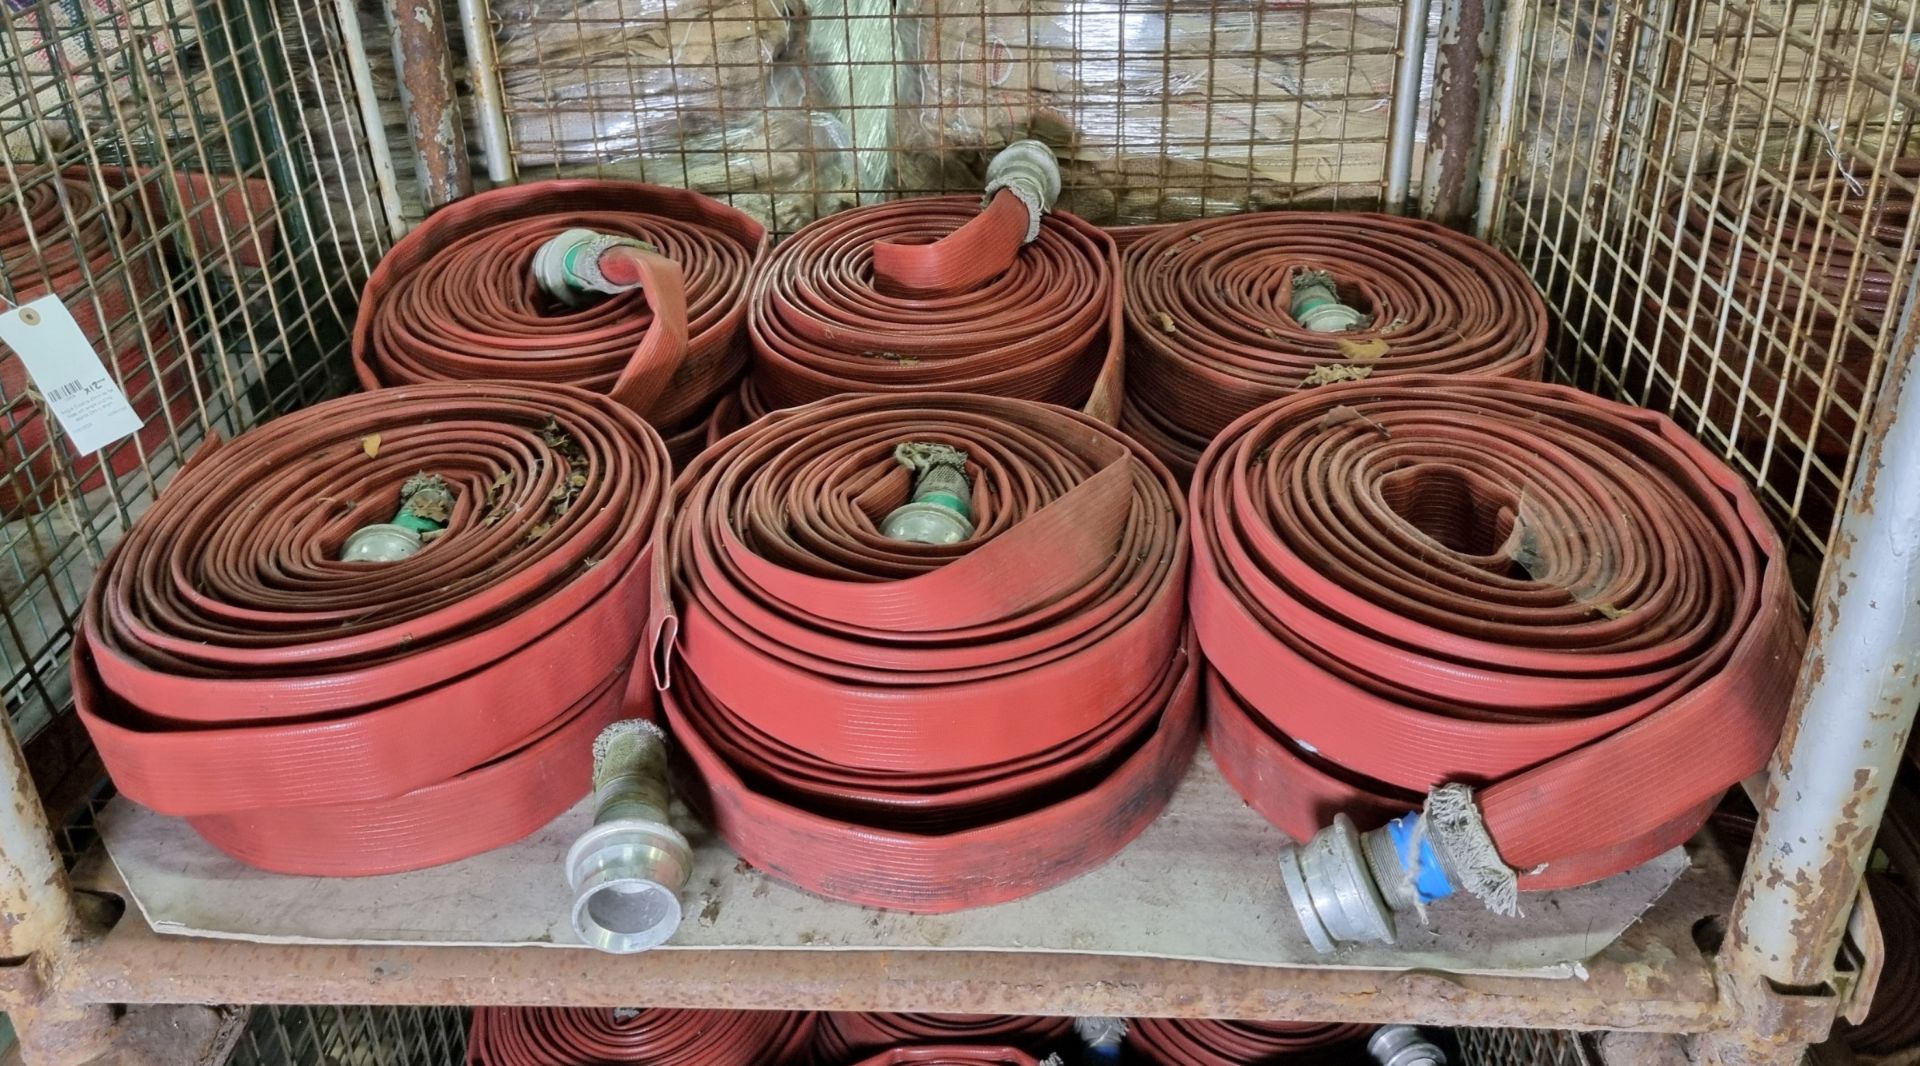 12x Angus Duraline 45mm lay flat hoses with single coupling - approx 23m in length - Image 2 of 4